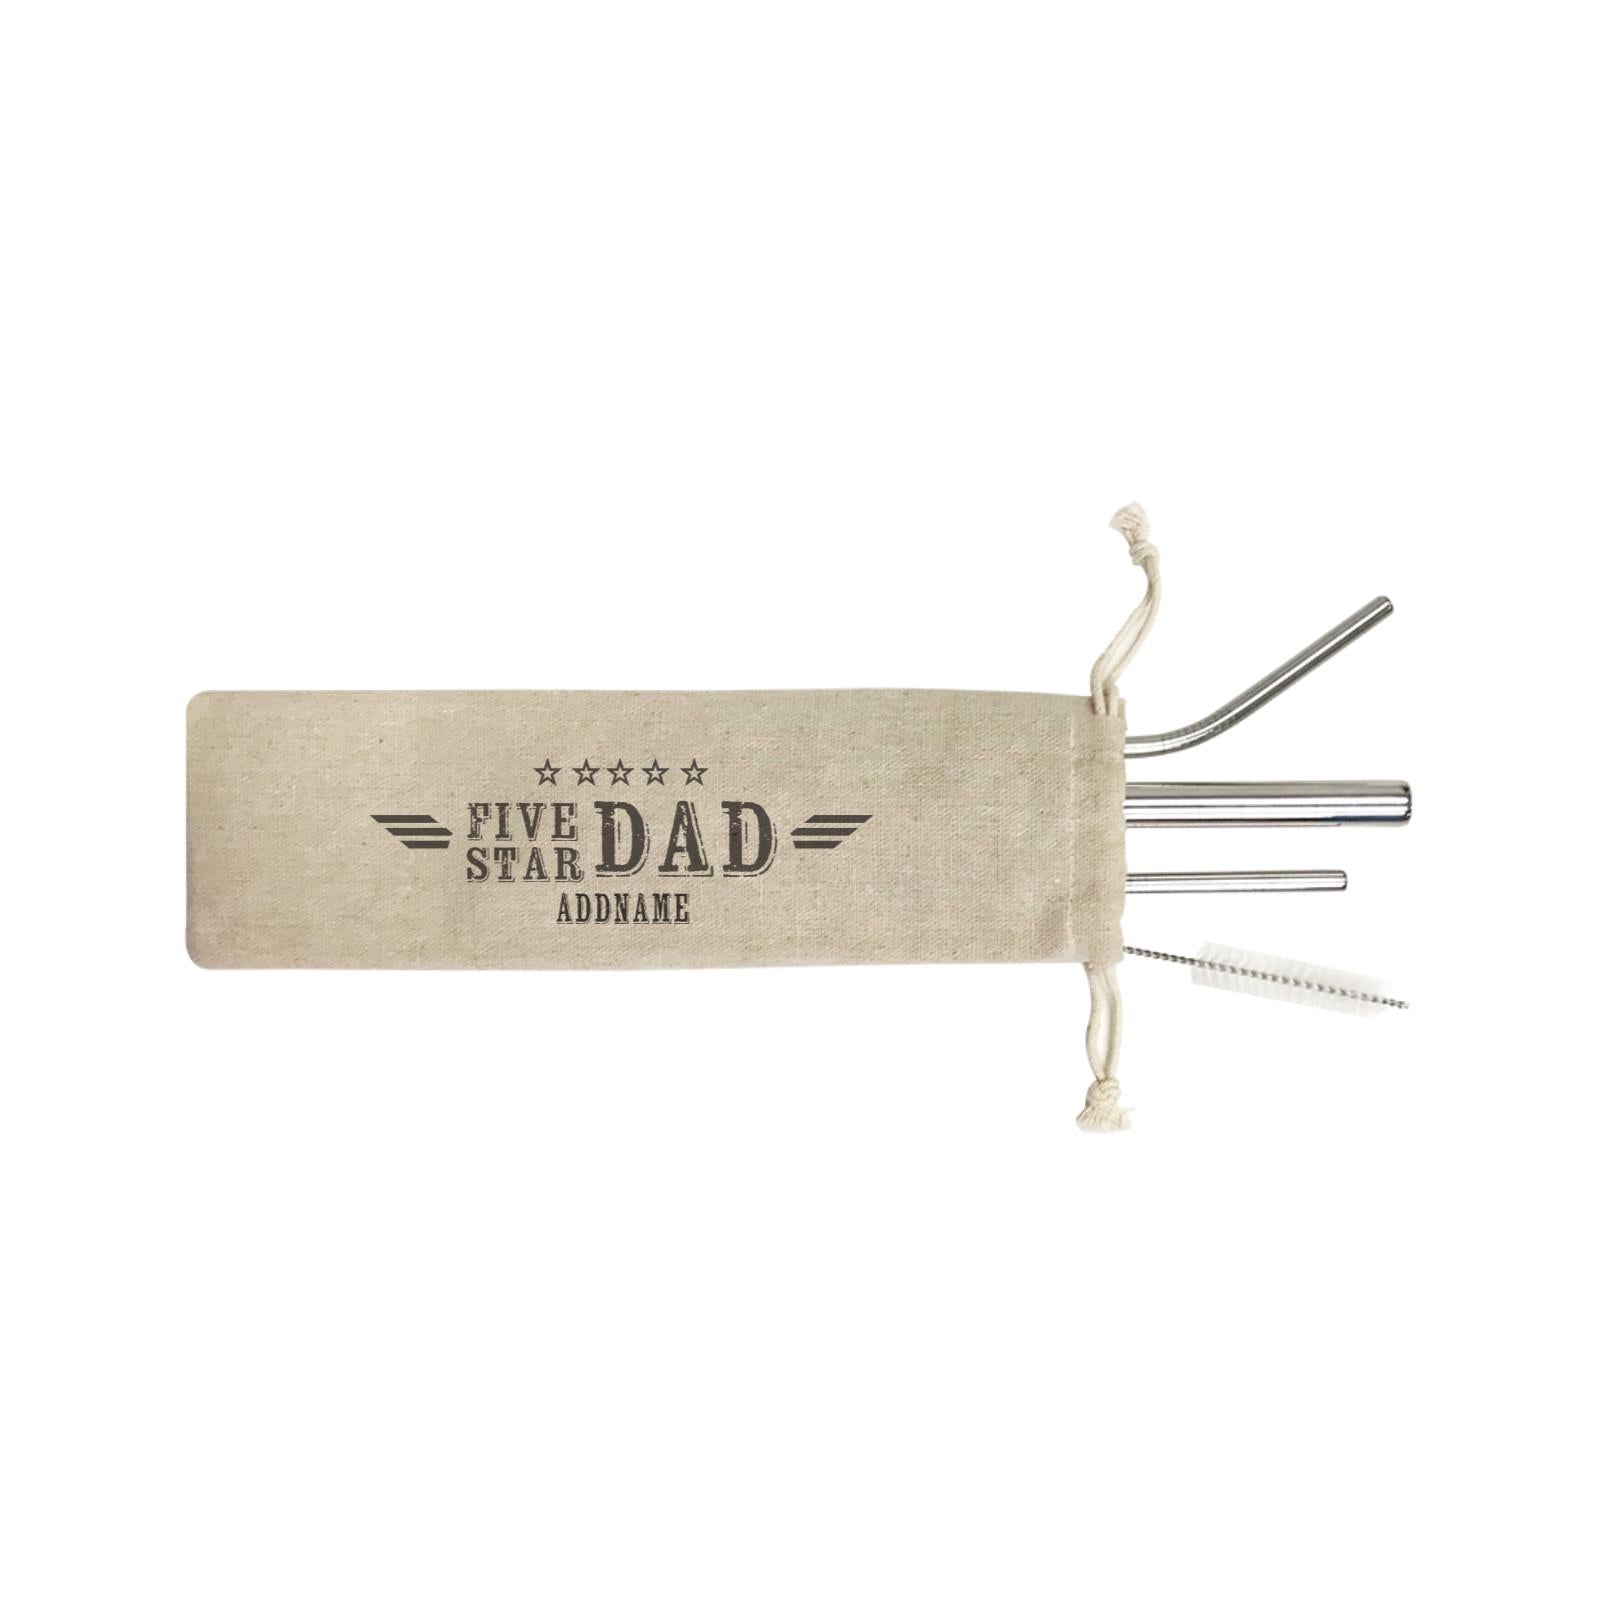 Five Star Dad Addname SB 4-In-1 Stainless Steel Straw Set in Satchel